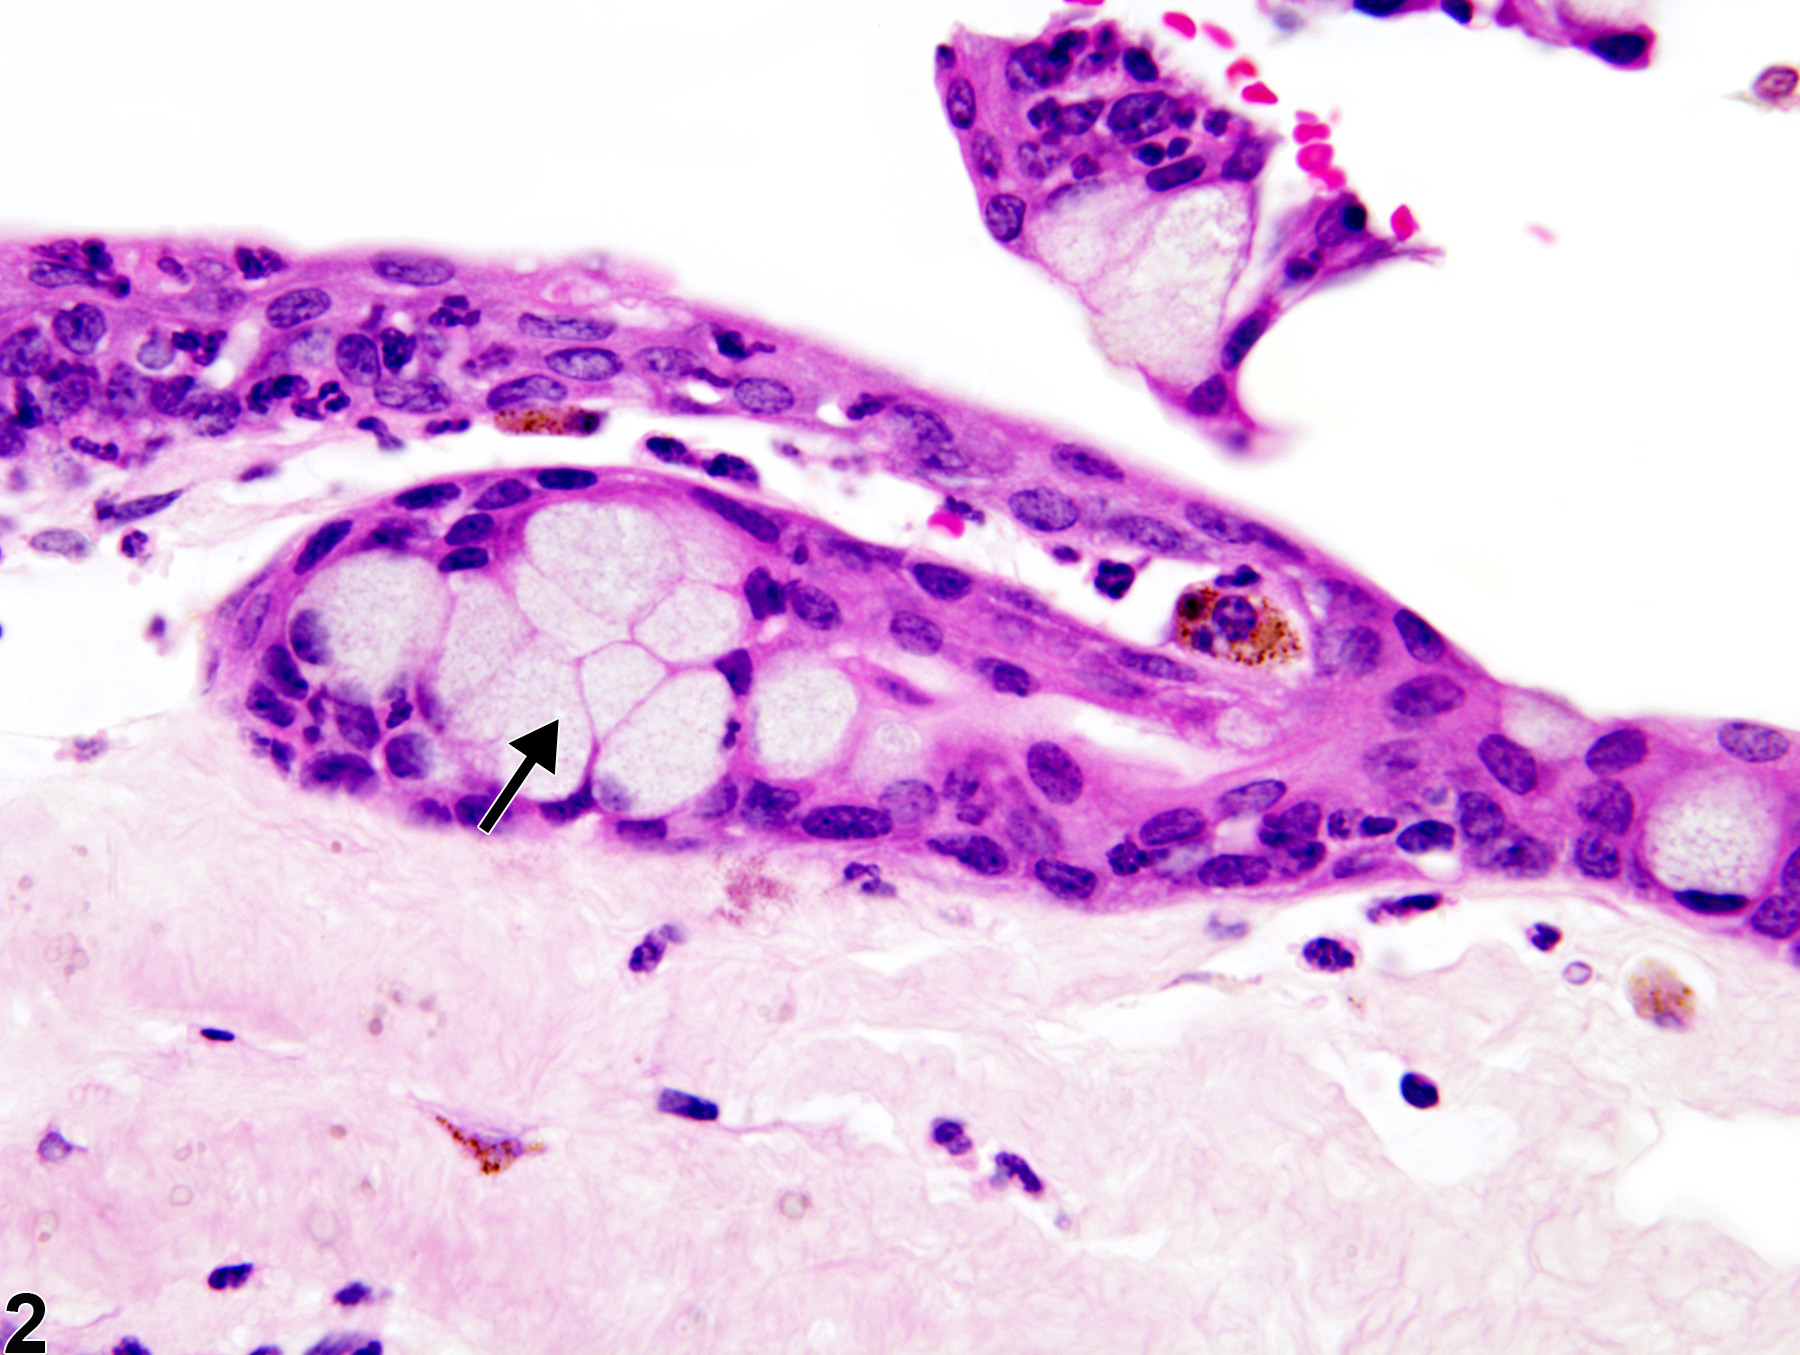 Image of cornea metaplasia, goblet cell in the eye from a female B6C3F1 mouse in a chronic study